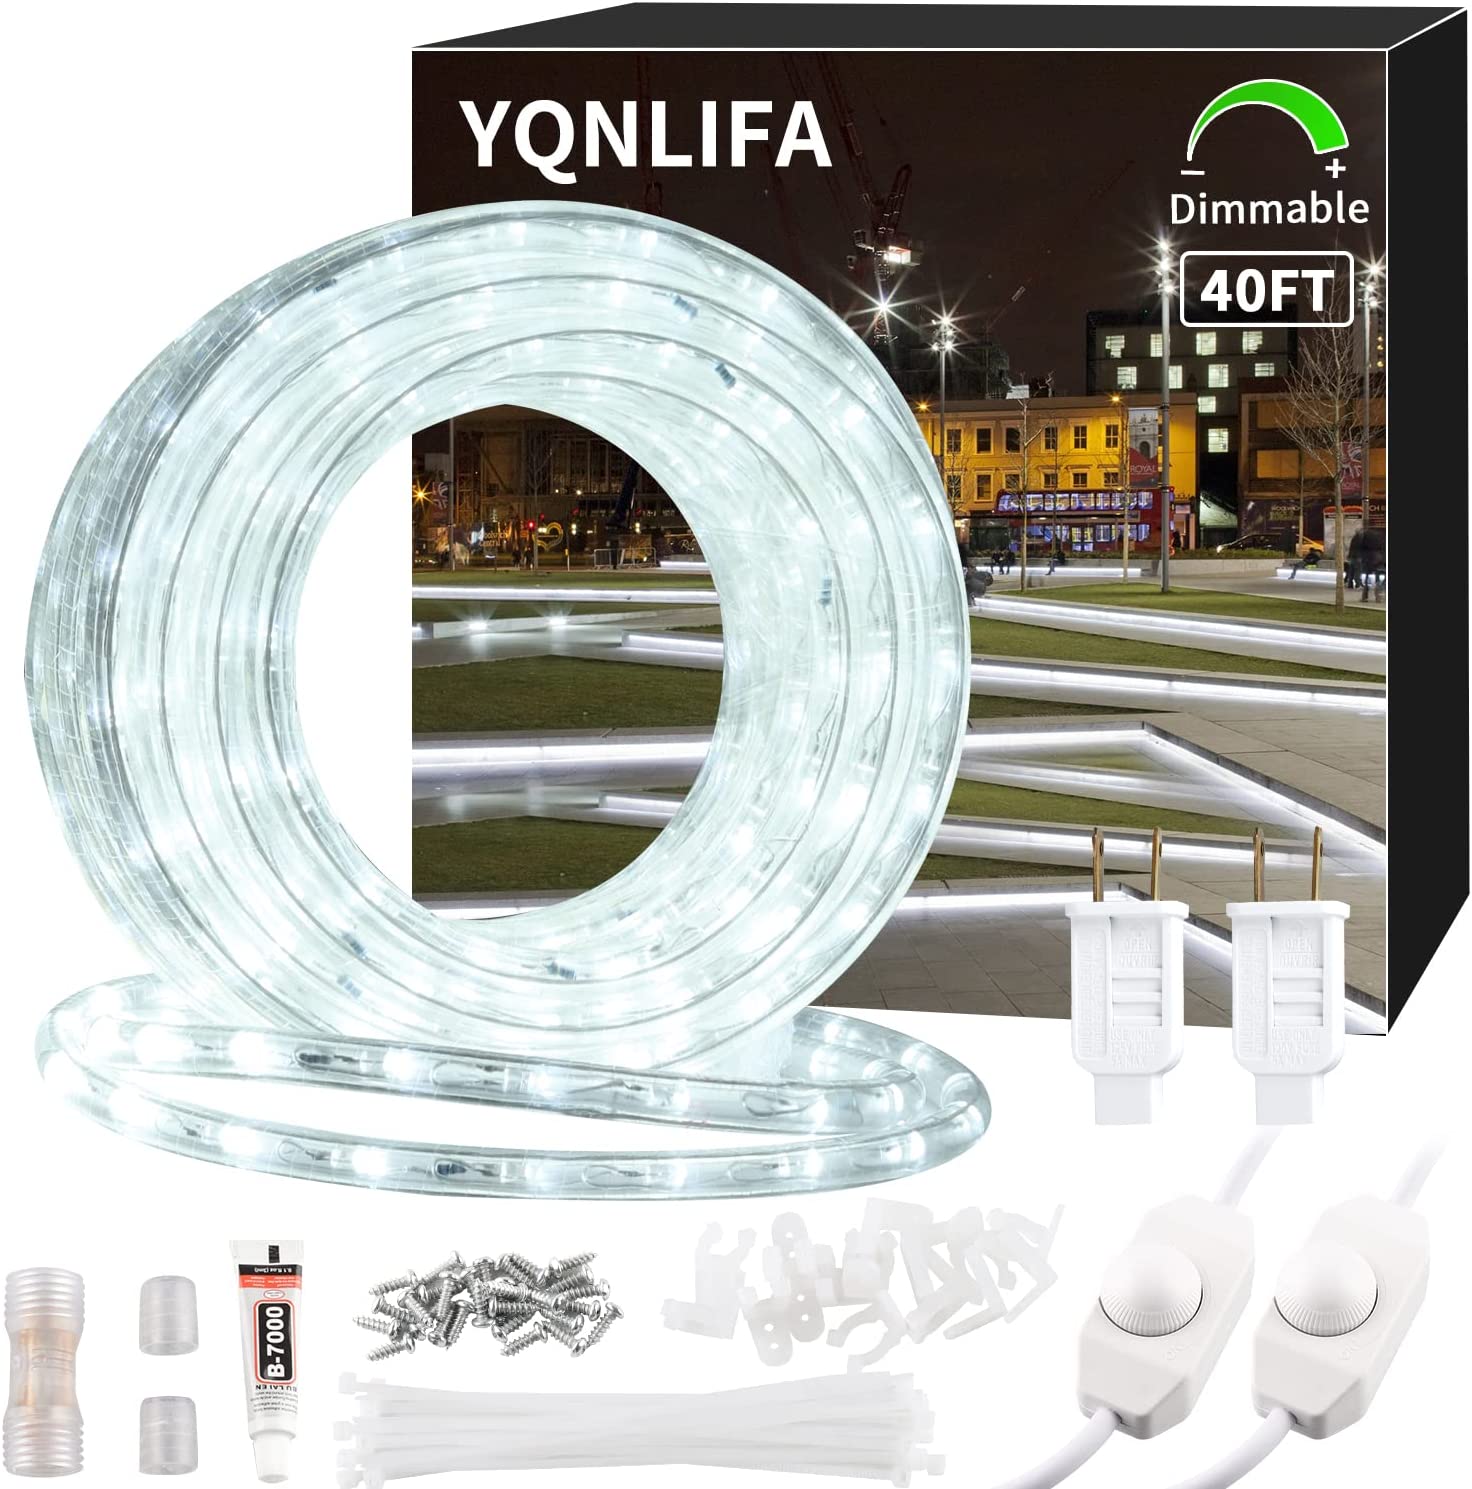 YQNLIFA Dimmable 40ft LED Rope Lights, 432 LEDs IP65 Waterproof Outdoor Indoor Linkable Cuttable Rope Light, 110V 6000K Daylight White Rope Light for Patio Garden Corridor Home Party Décor